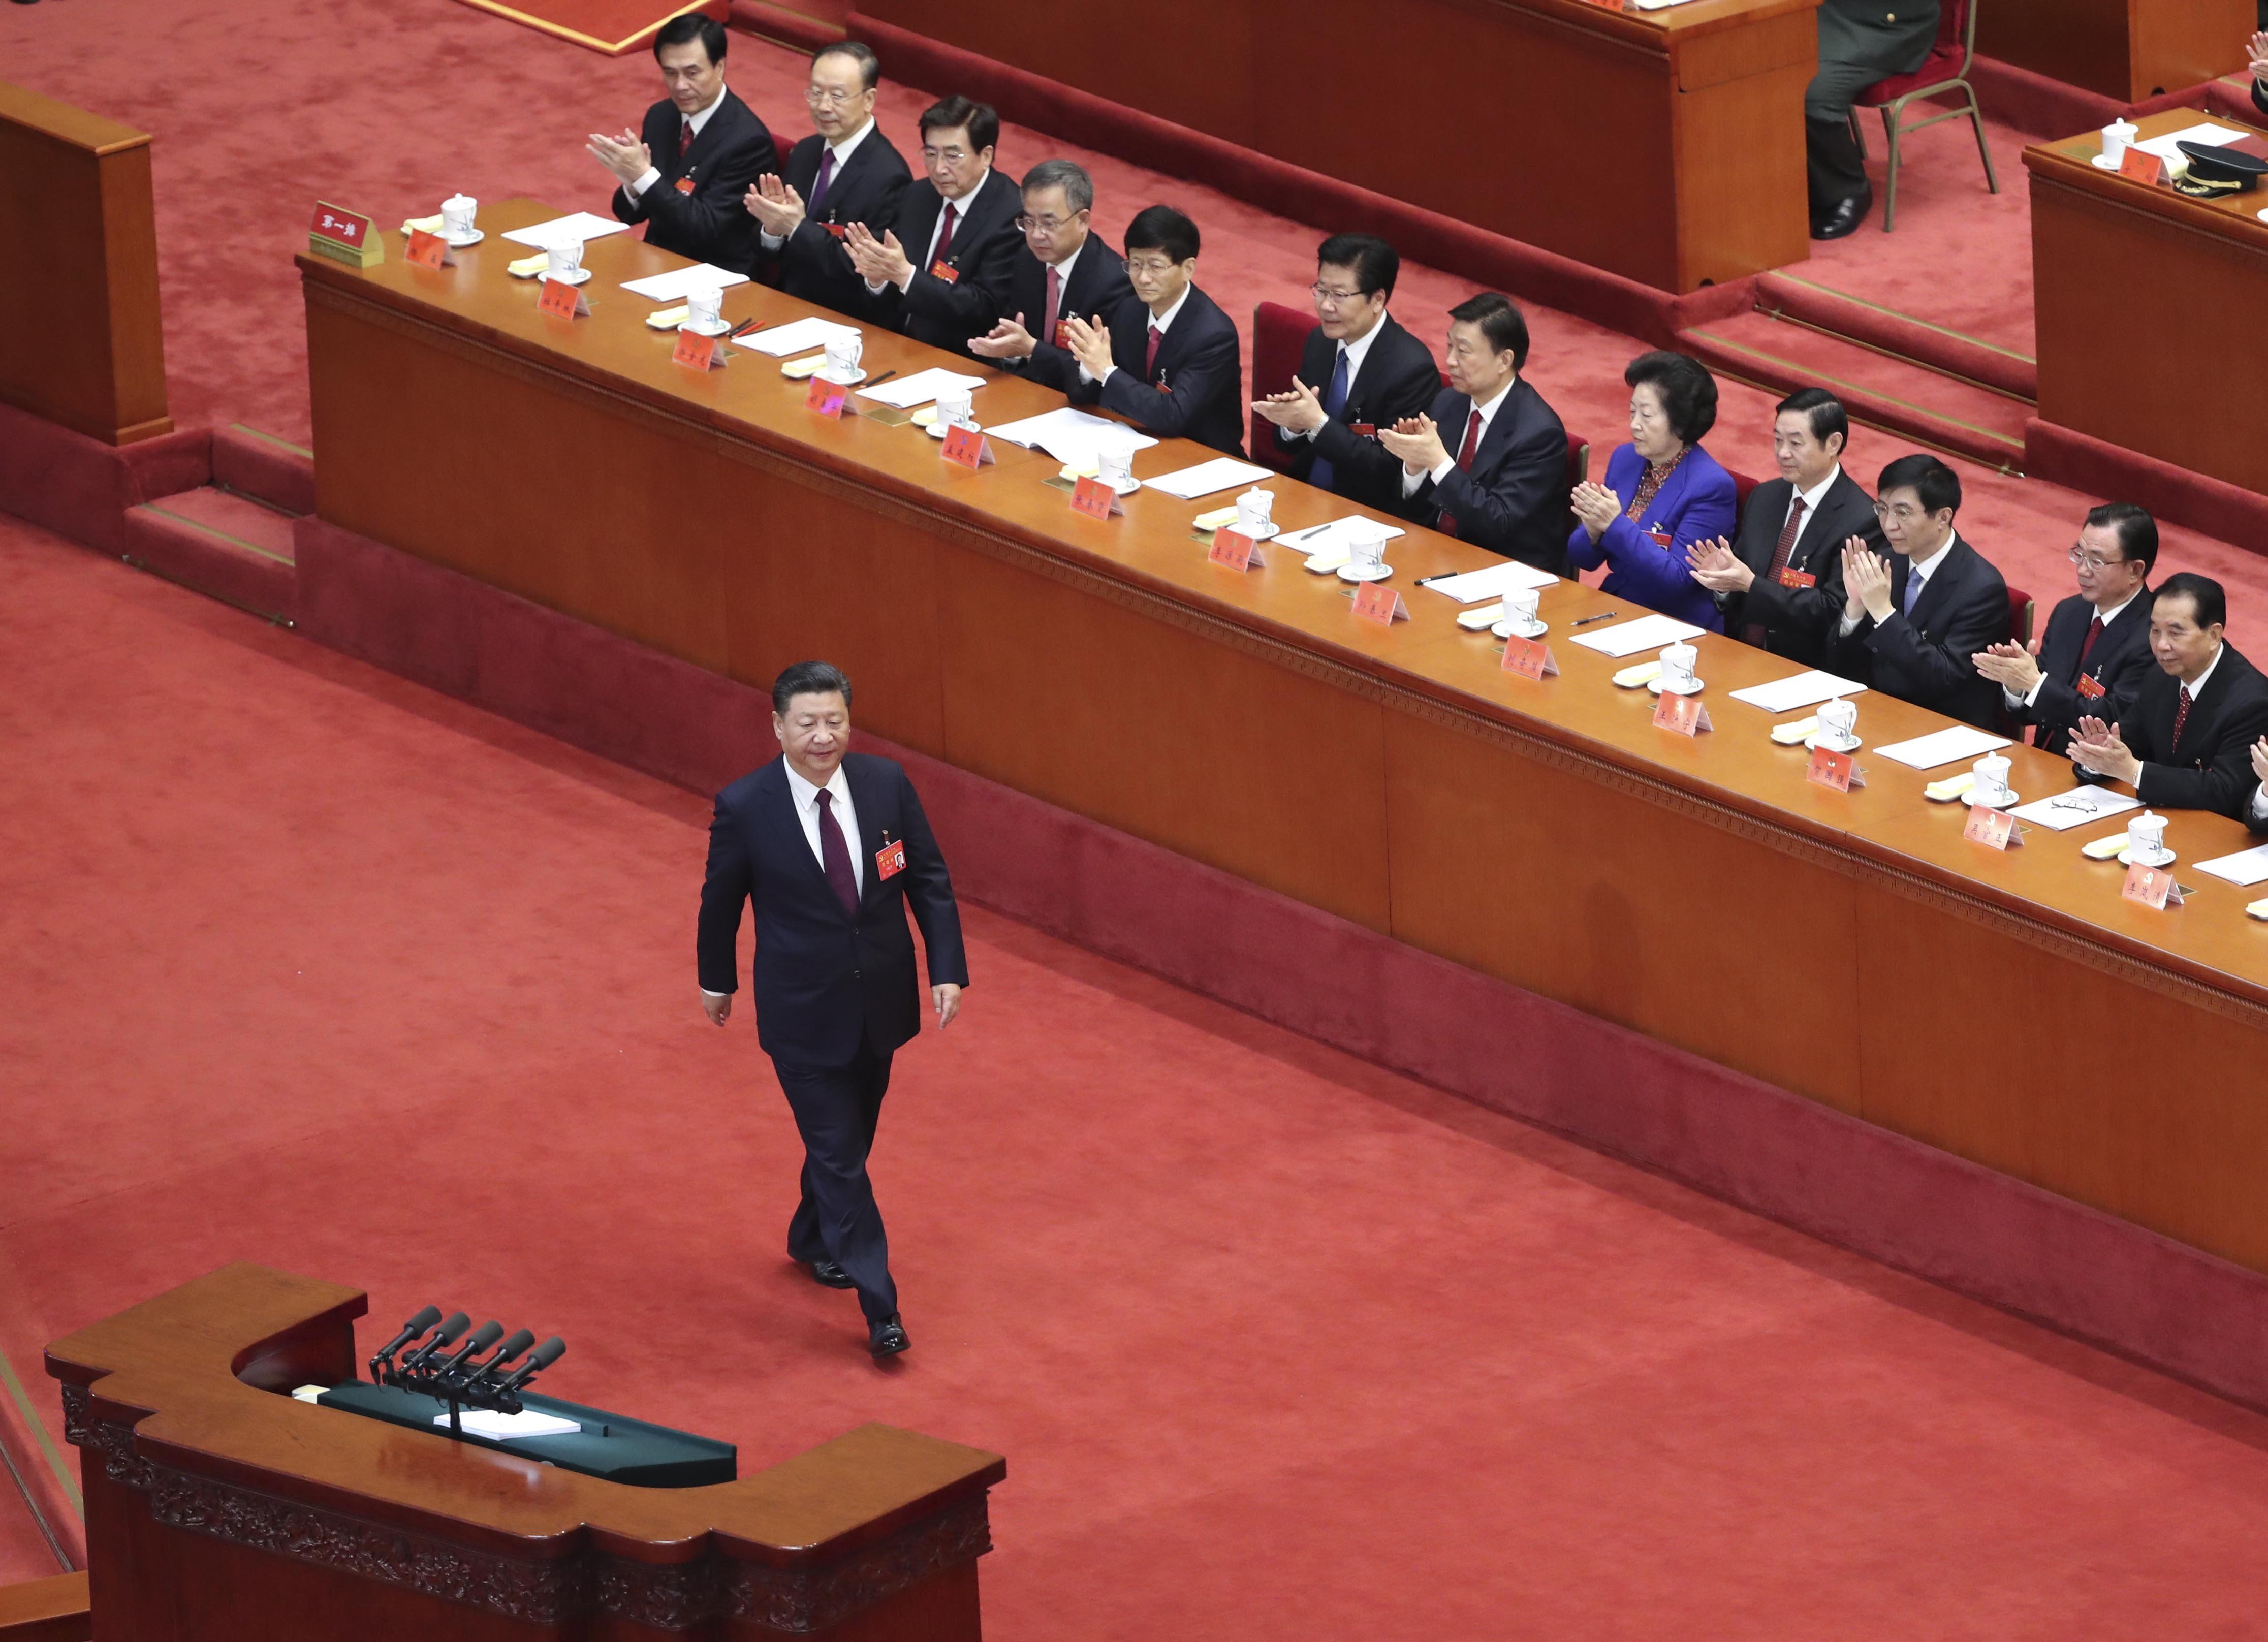 The prospects of the generation expected to provide a successor to Xi Jinping receded at the 19th party congress, when none of them were made members of the Politburo Standing Committee. Photo: Xinhua